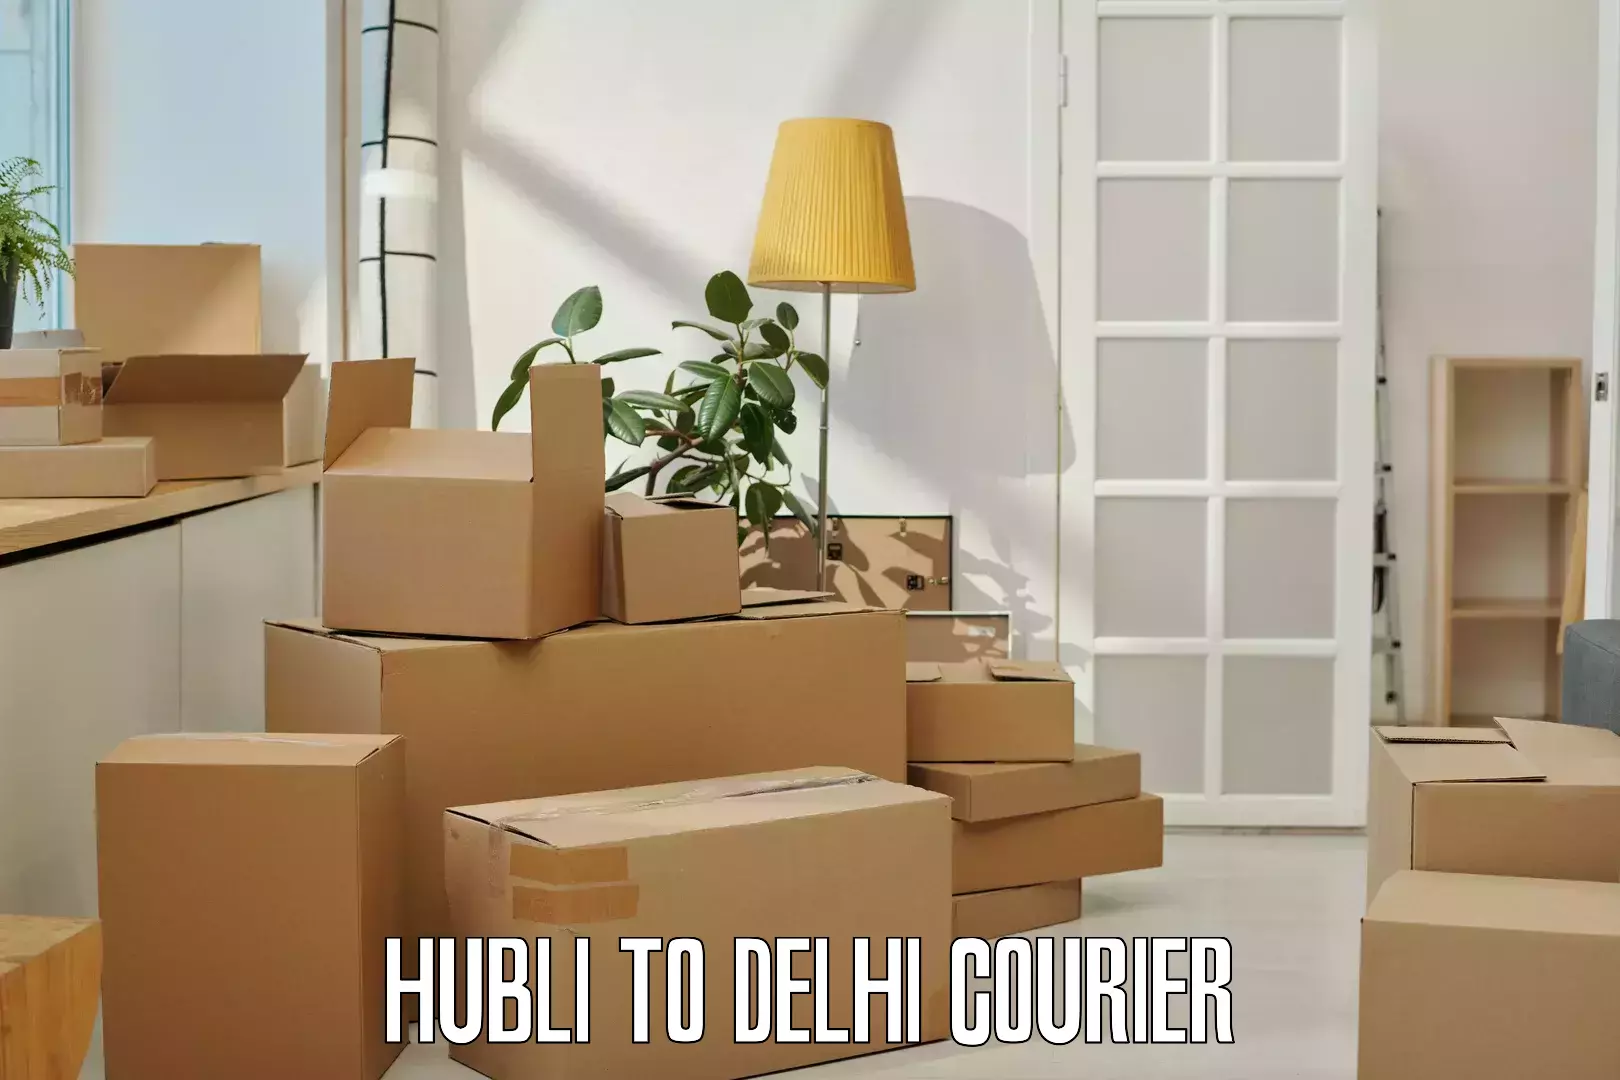 Courier service innovation Hubli to NCR